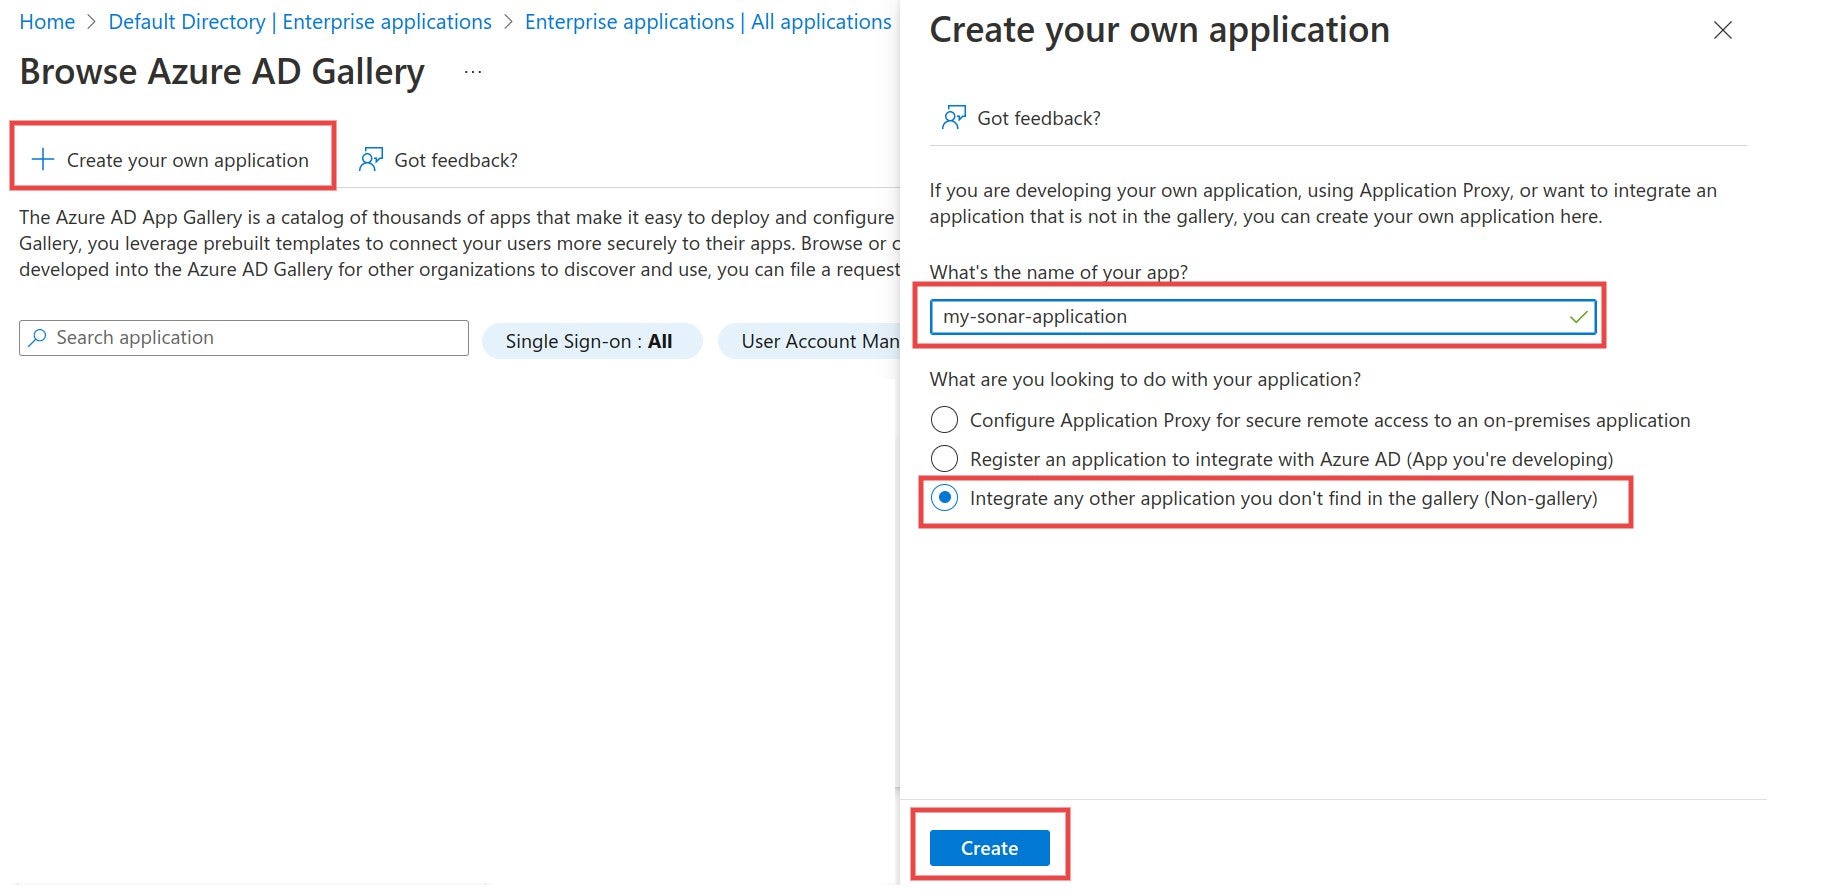 Create a new Enterprise application for SonarQube when setting up SAML authentication in Azure.